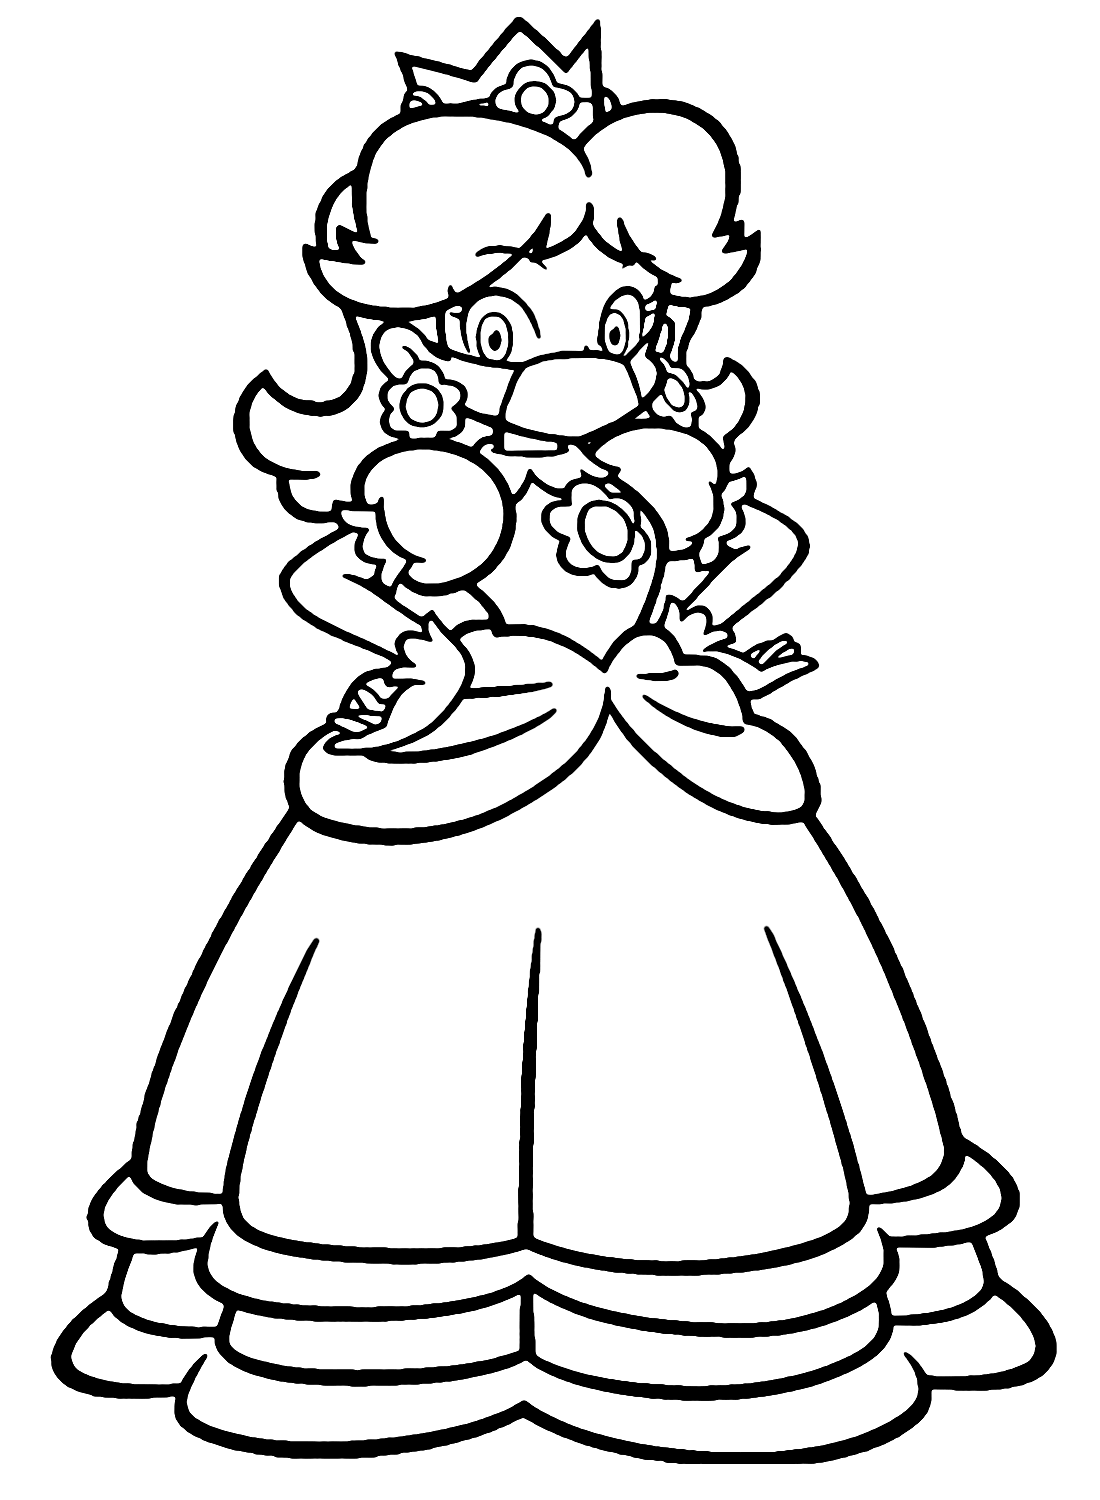 Princess Daisy with Mask Coloring Pages